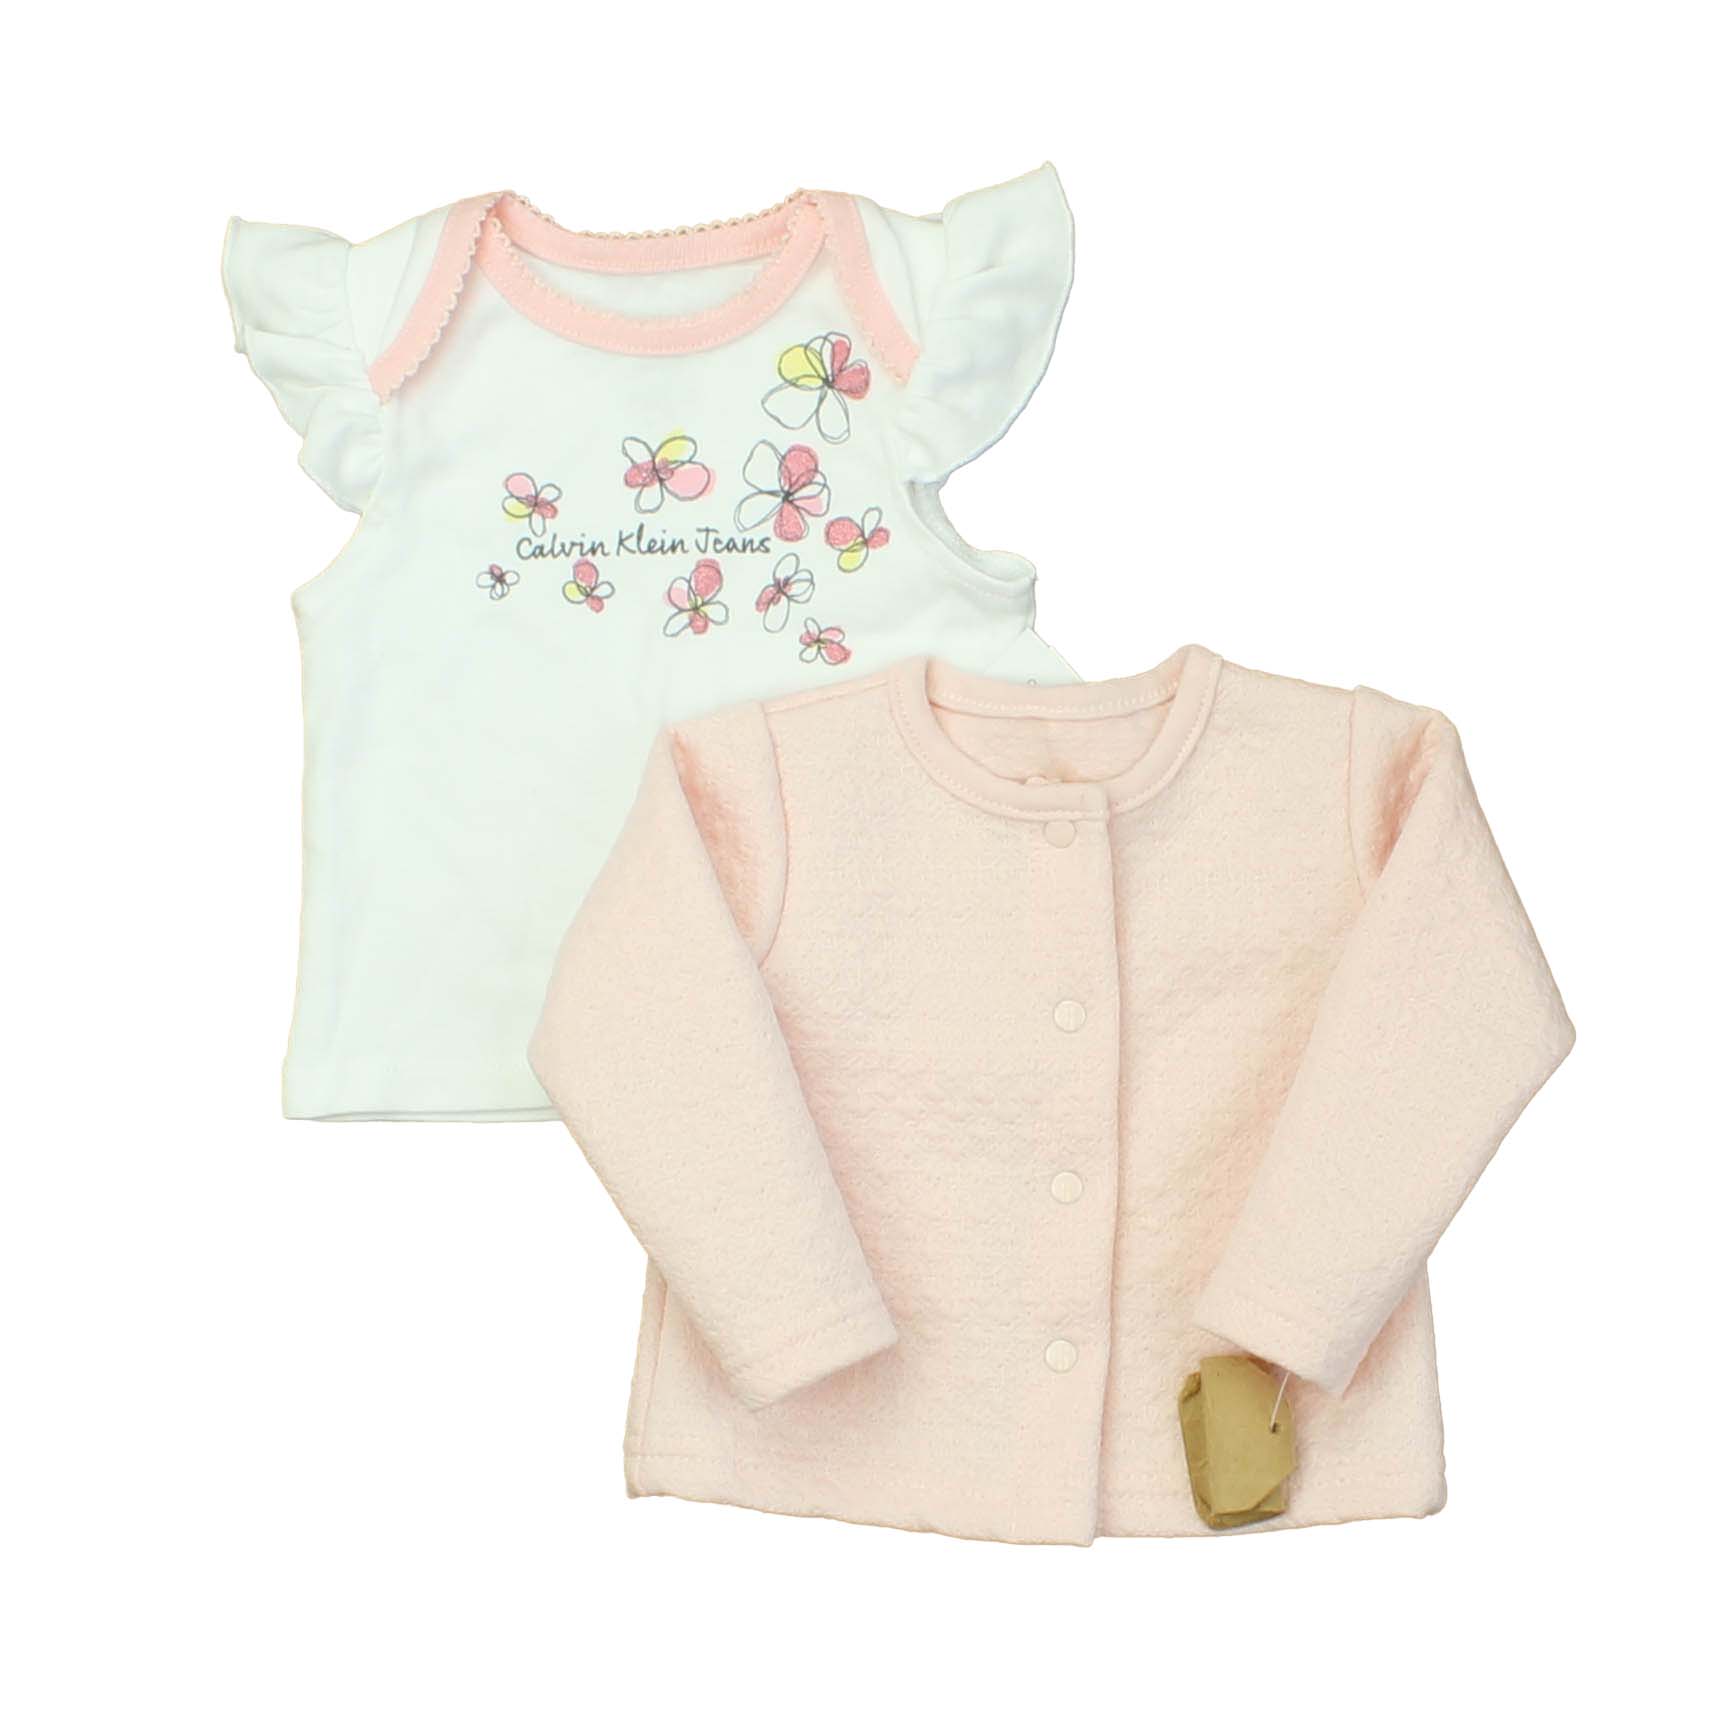 2-pieces Apparel Sets size: 0-3 Months - The Swoondle Society